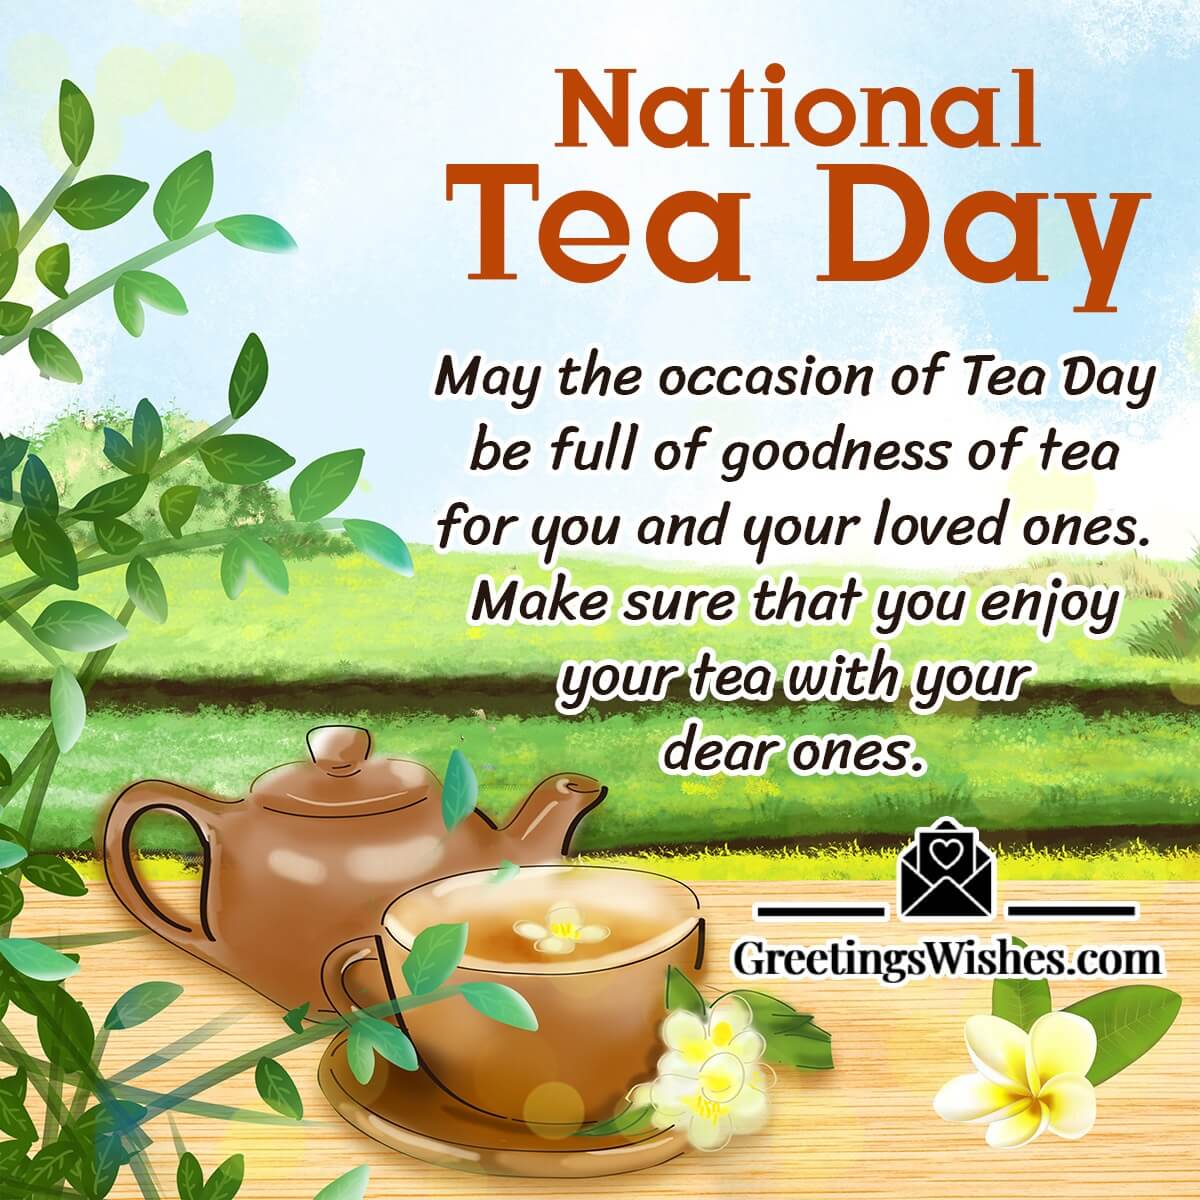 National Tea Day Messages